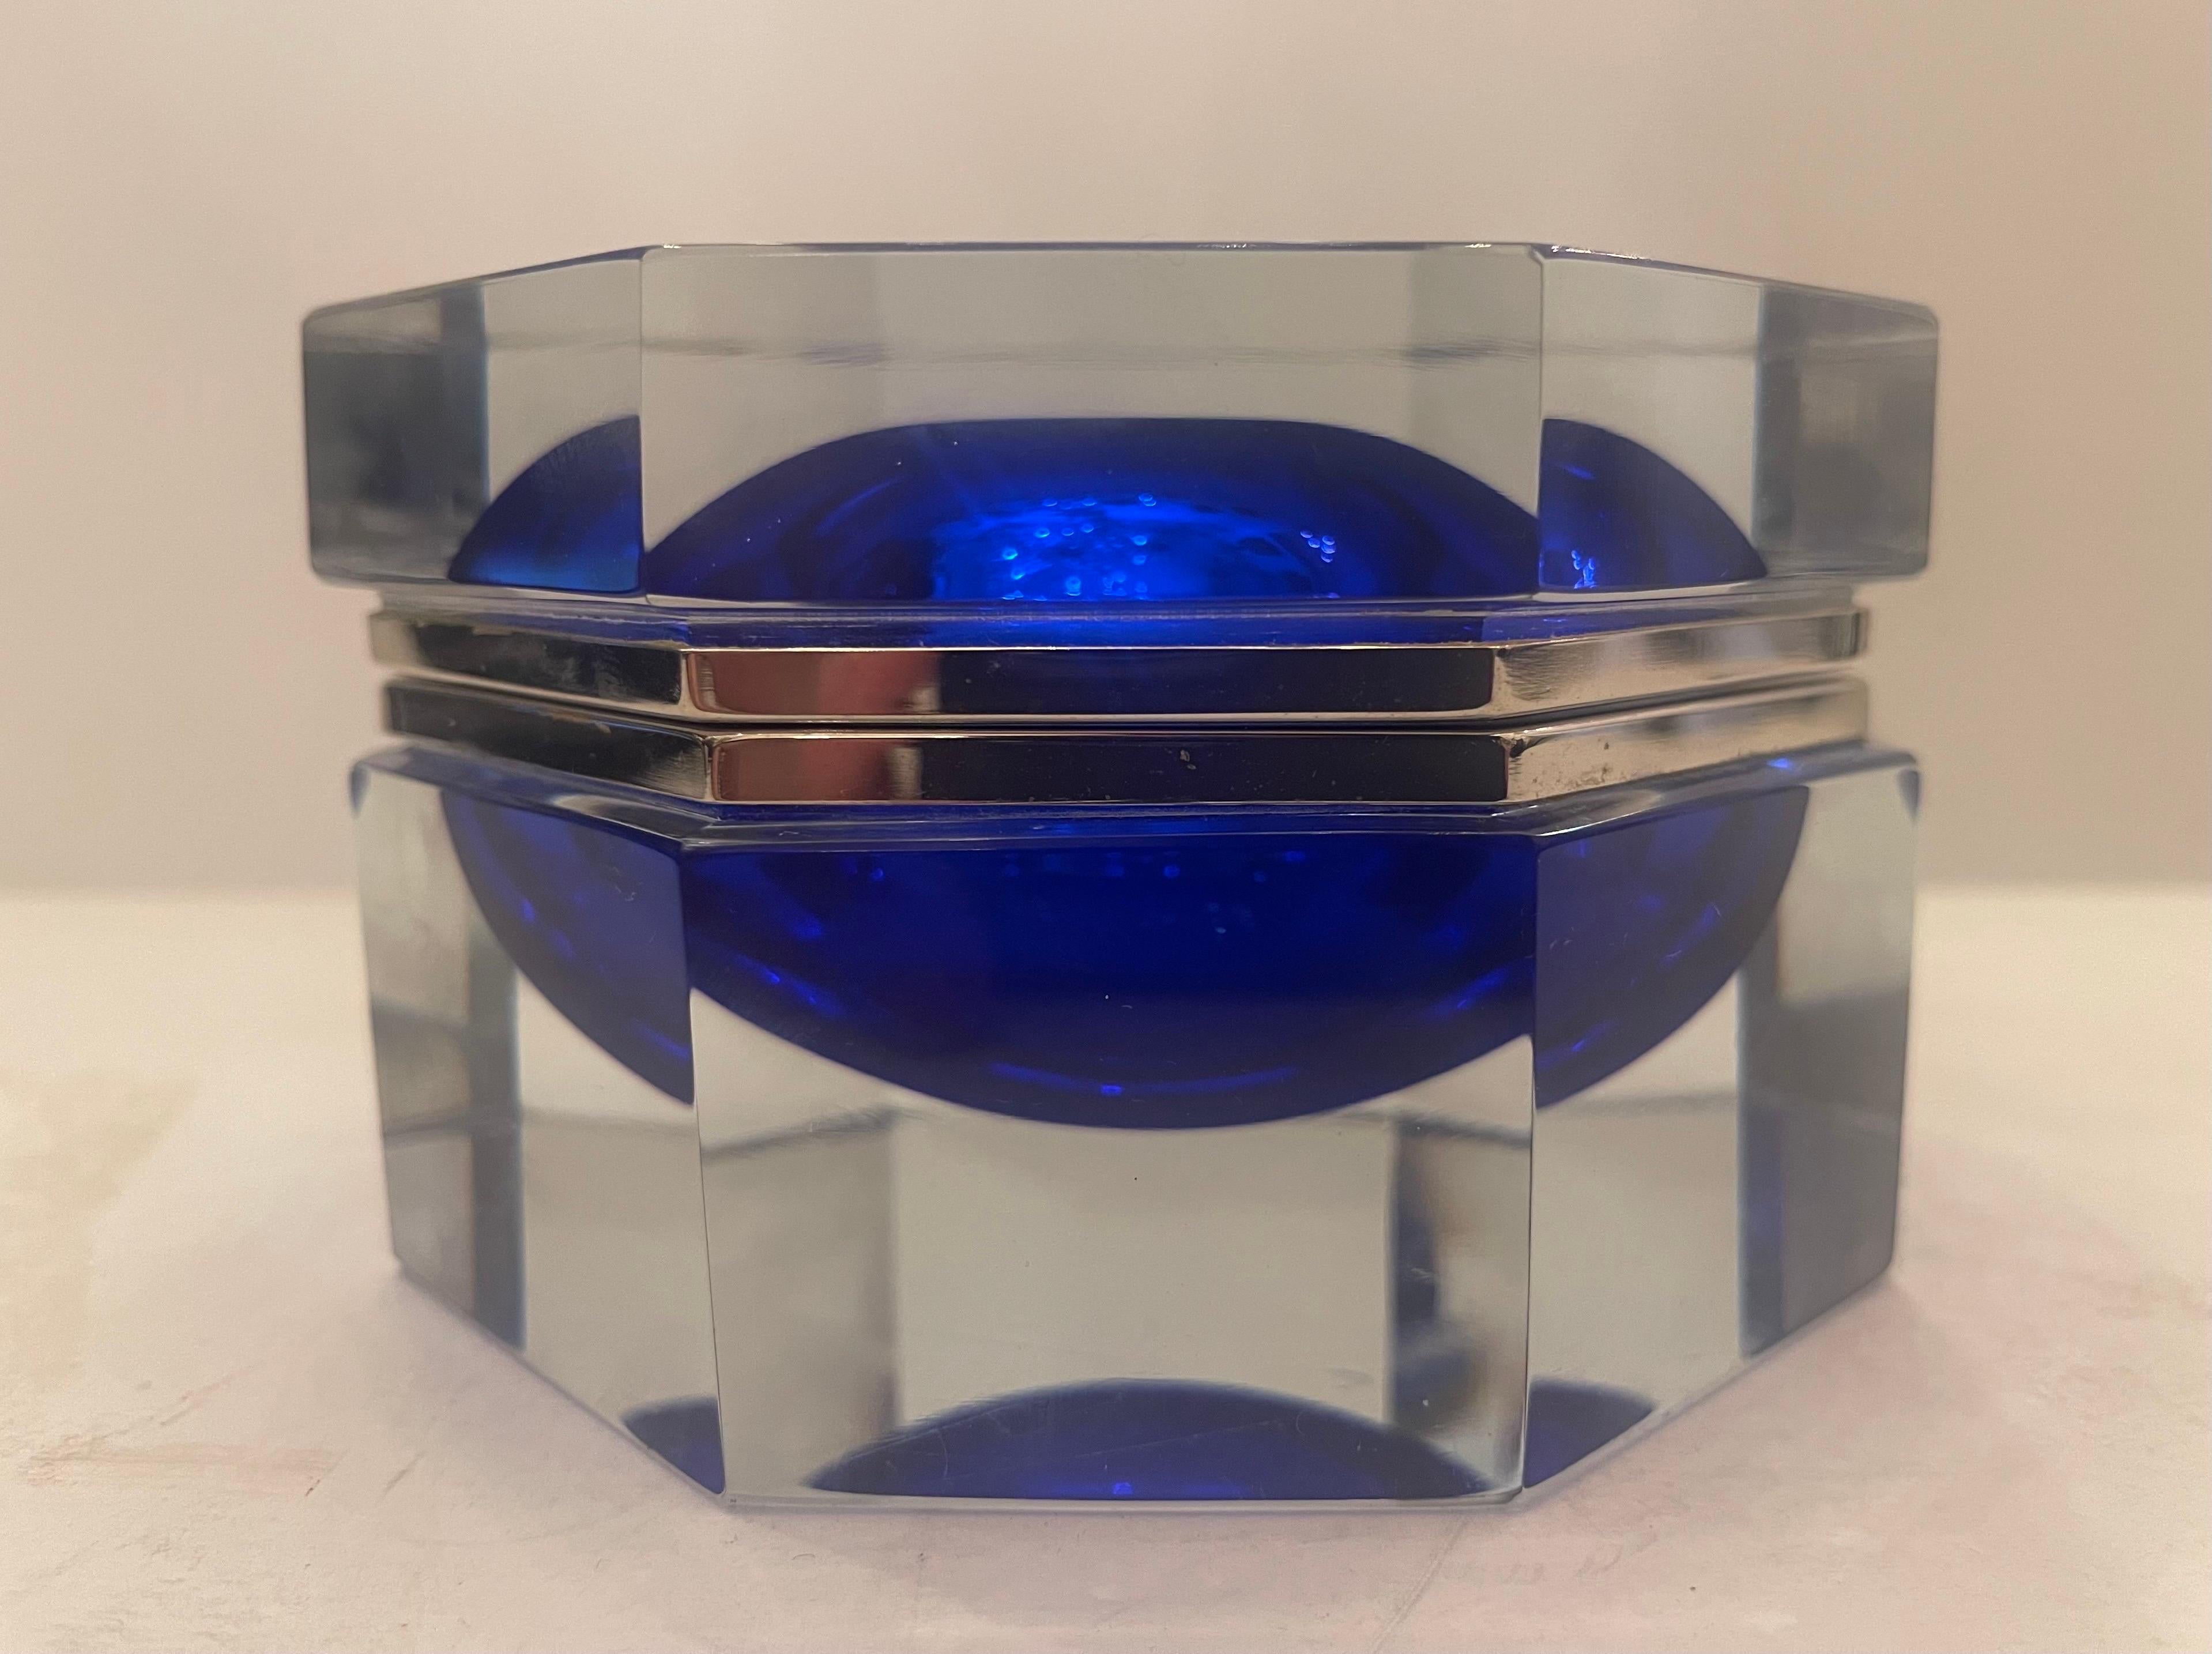 A Wonderful Mid-Century Modern Murano Cobalt Blue Art Glass / Crystal With Polished Nickel Mounting Casket / Box.